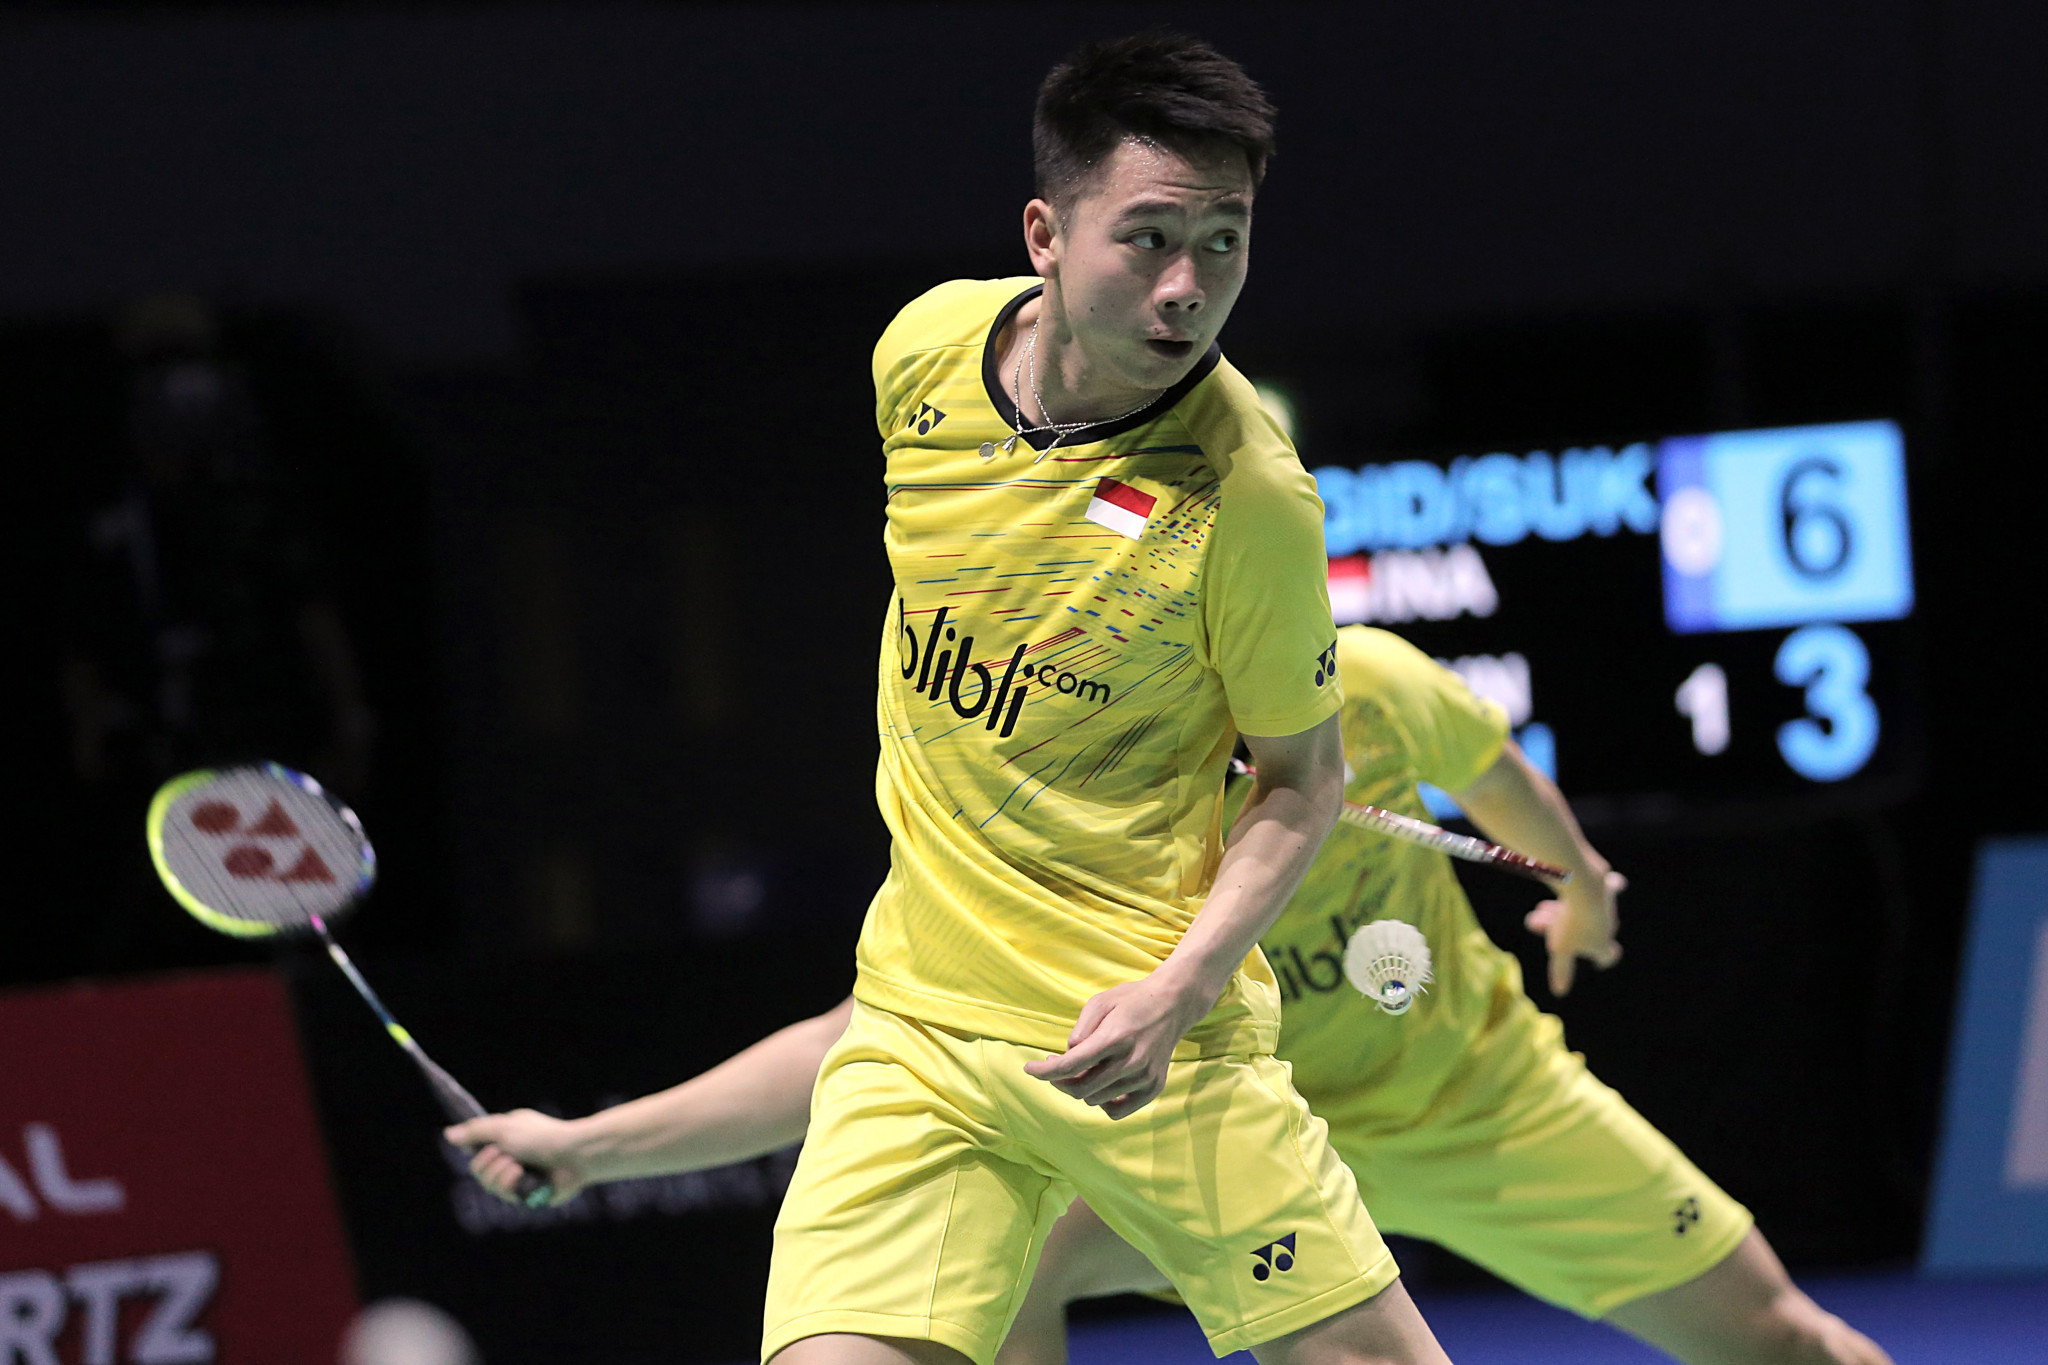 Men's doubles favourites Kevin Sanjaya Sukamuljo, pictured, and Marcus Fernaldi Gideon of Indonesia will face Japanese duo Takeshi Kamura and Keigo Sonoda in their semi-final ©Getty Images